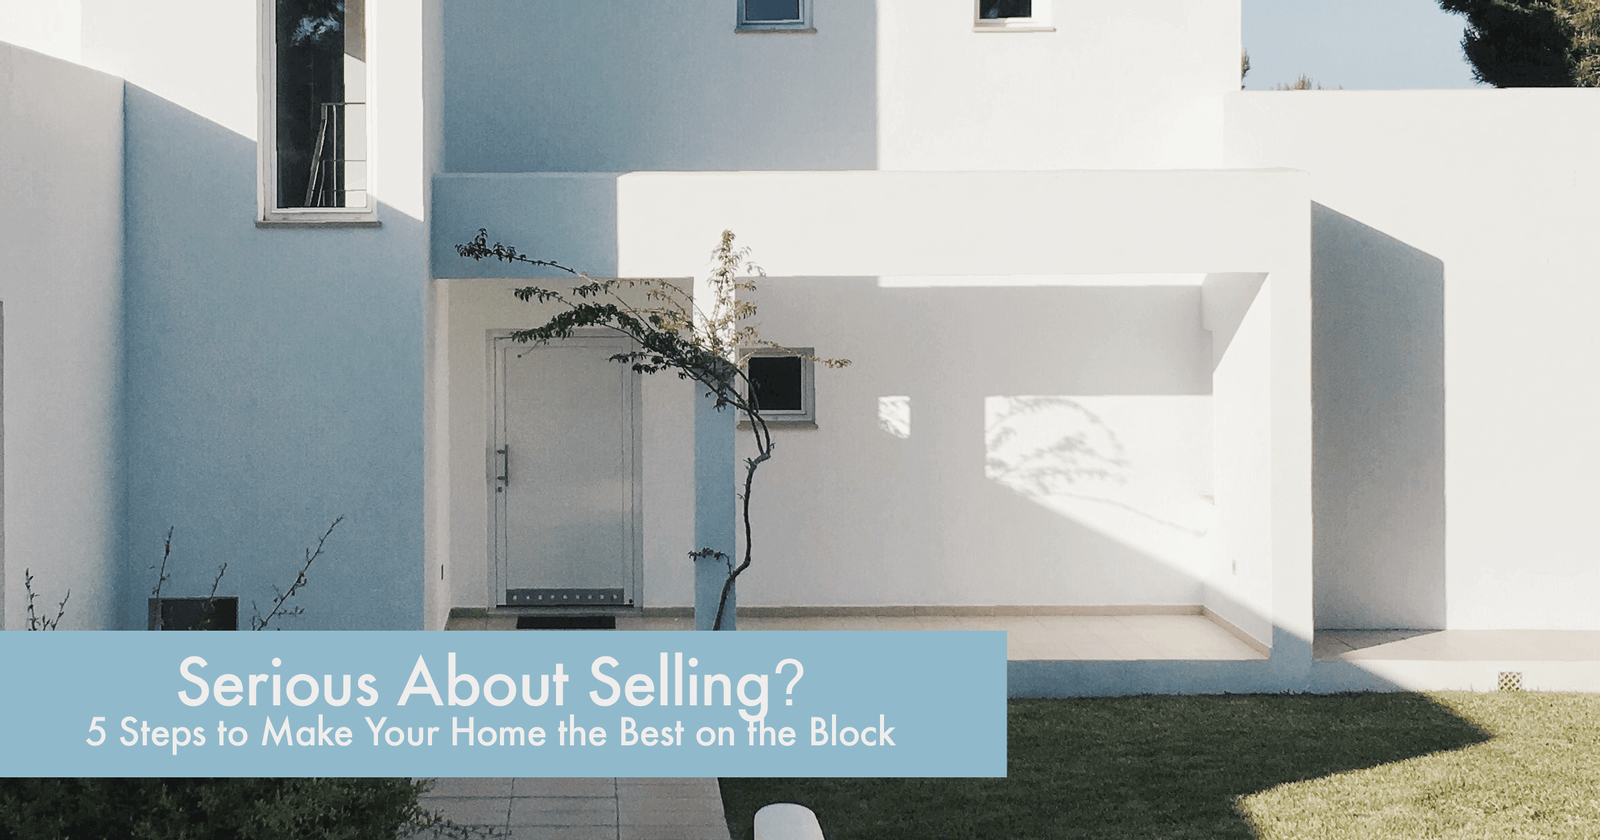 If you're Serious About Selling? Take 5 Steps to Make Your Home the Best on the Block